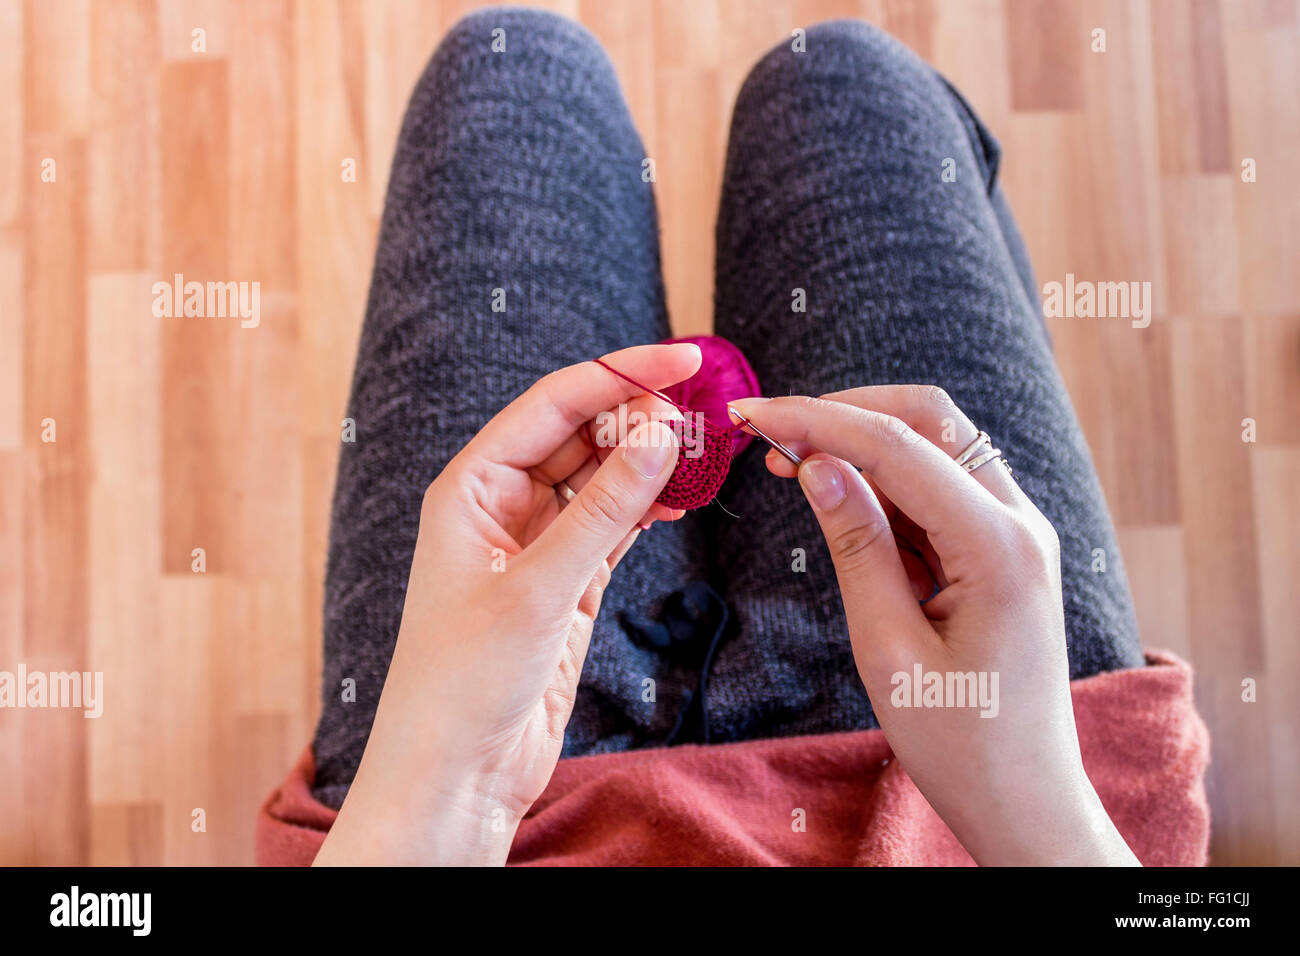 Girl making crochet circles for jewelry elements Stock Photo